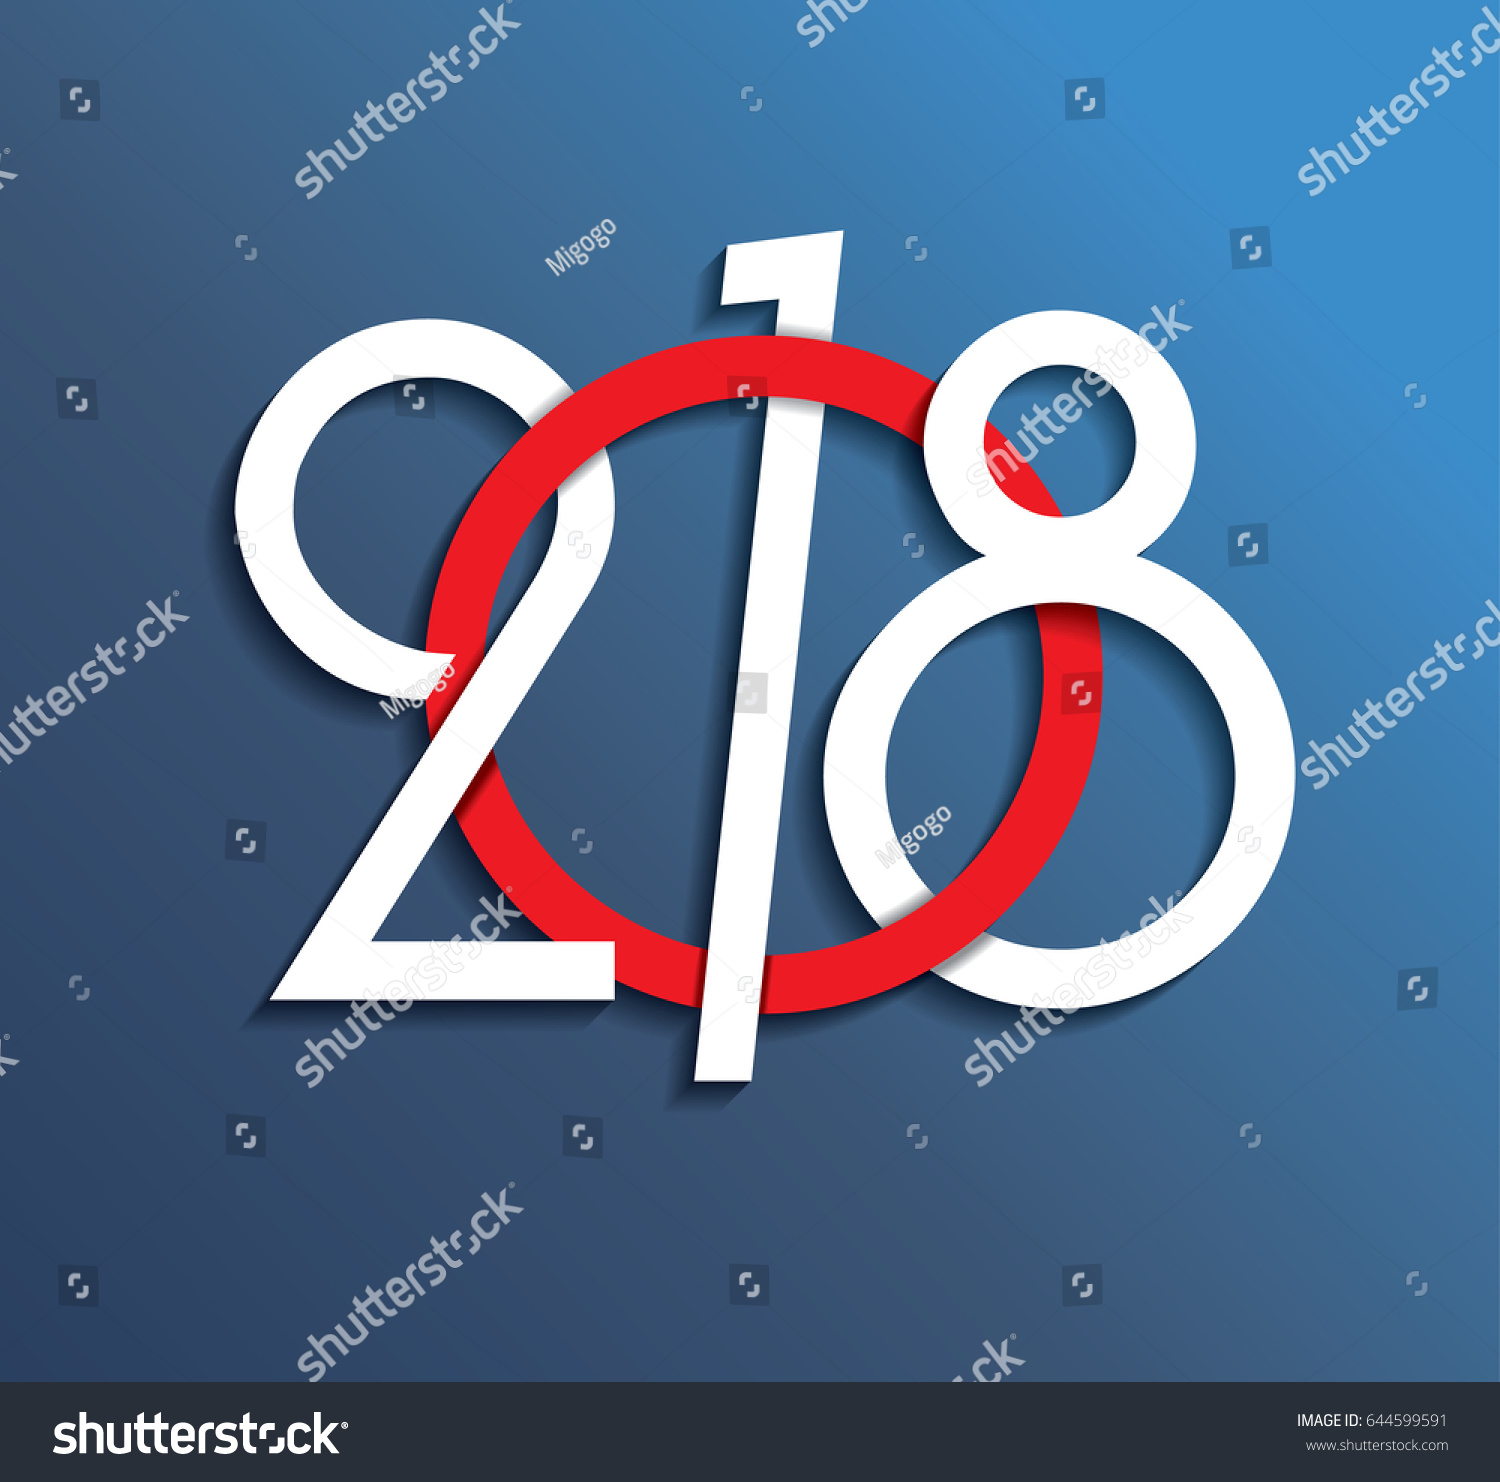 2018 Happy New Year or Christmas Background creative greeting card design can be used for